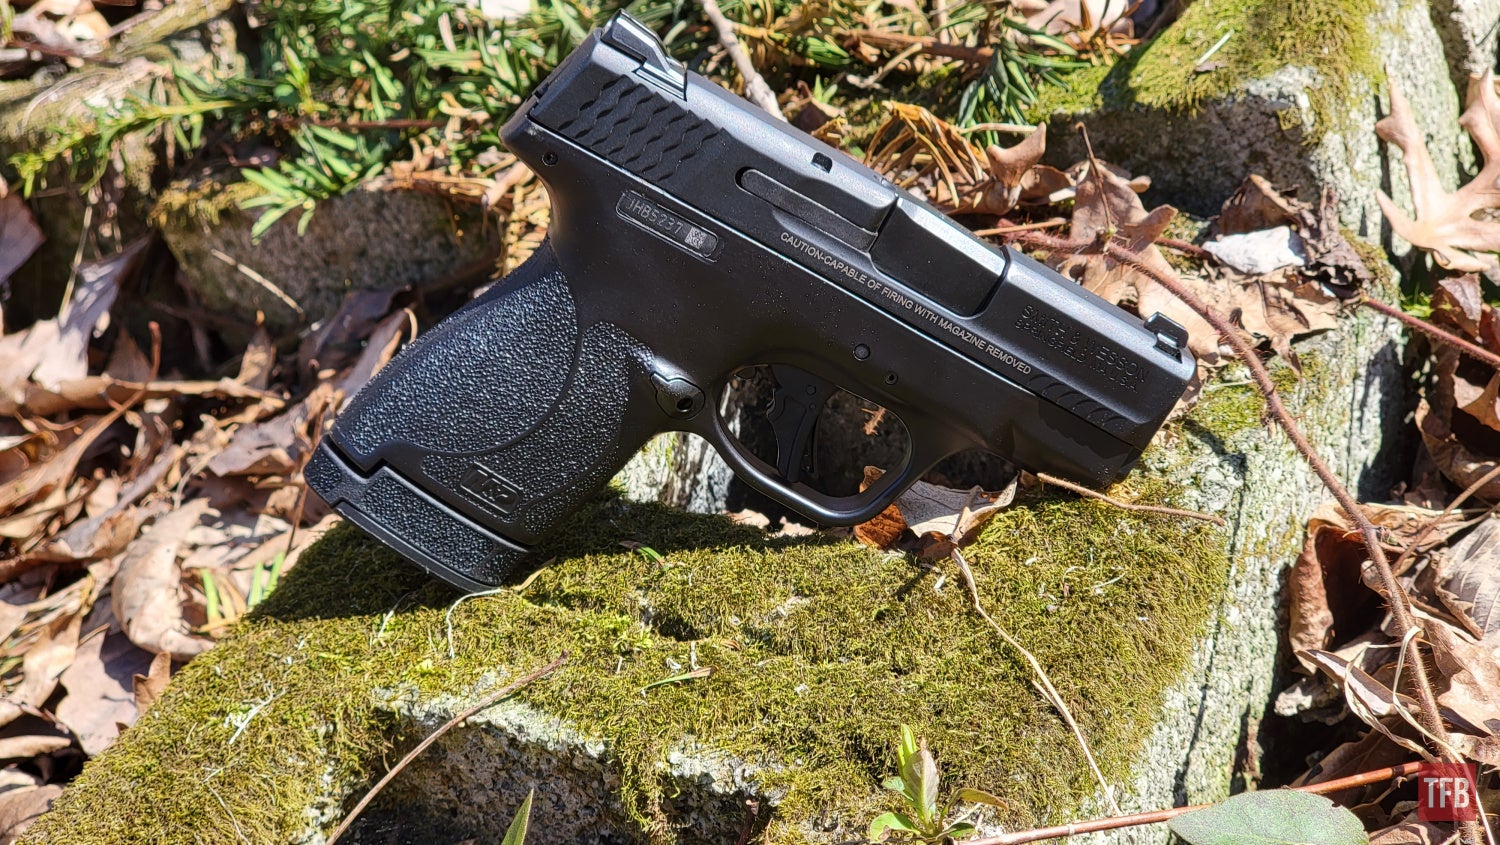 Introducing the NEW 13+1 Shield Plus Micro-Compact Pistol